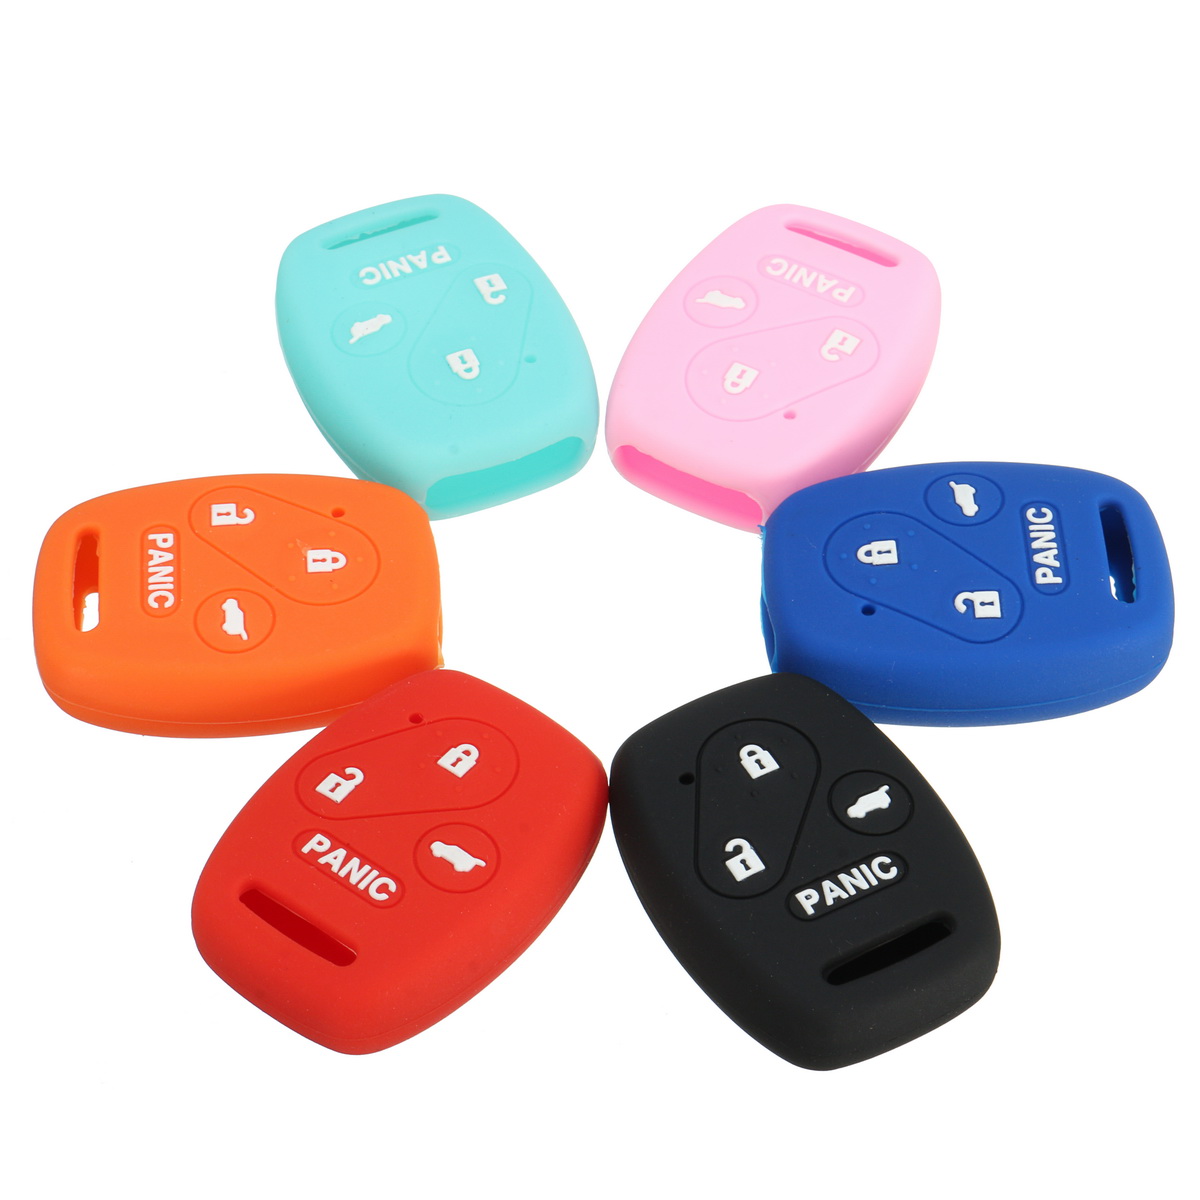 

Car Key Case Cover Silicone Car Key Keyless Fob Cover Shell Case 4 Button For Honda Accord Civic